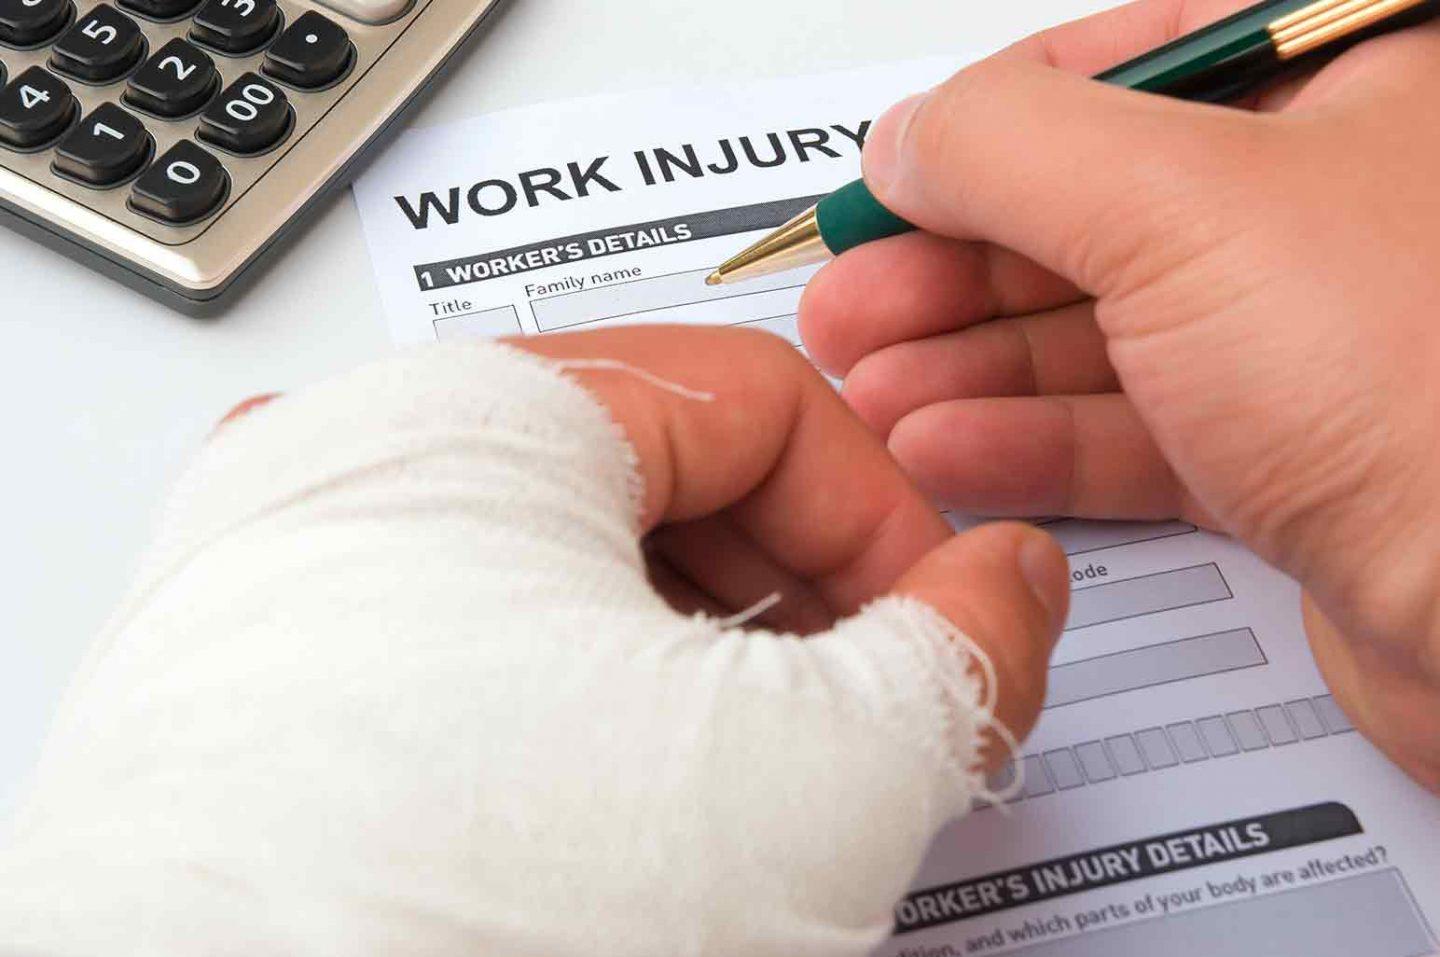 How To Handle an Injury At Work